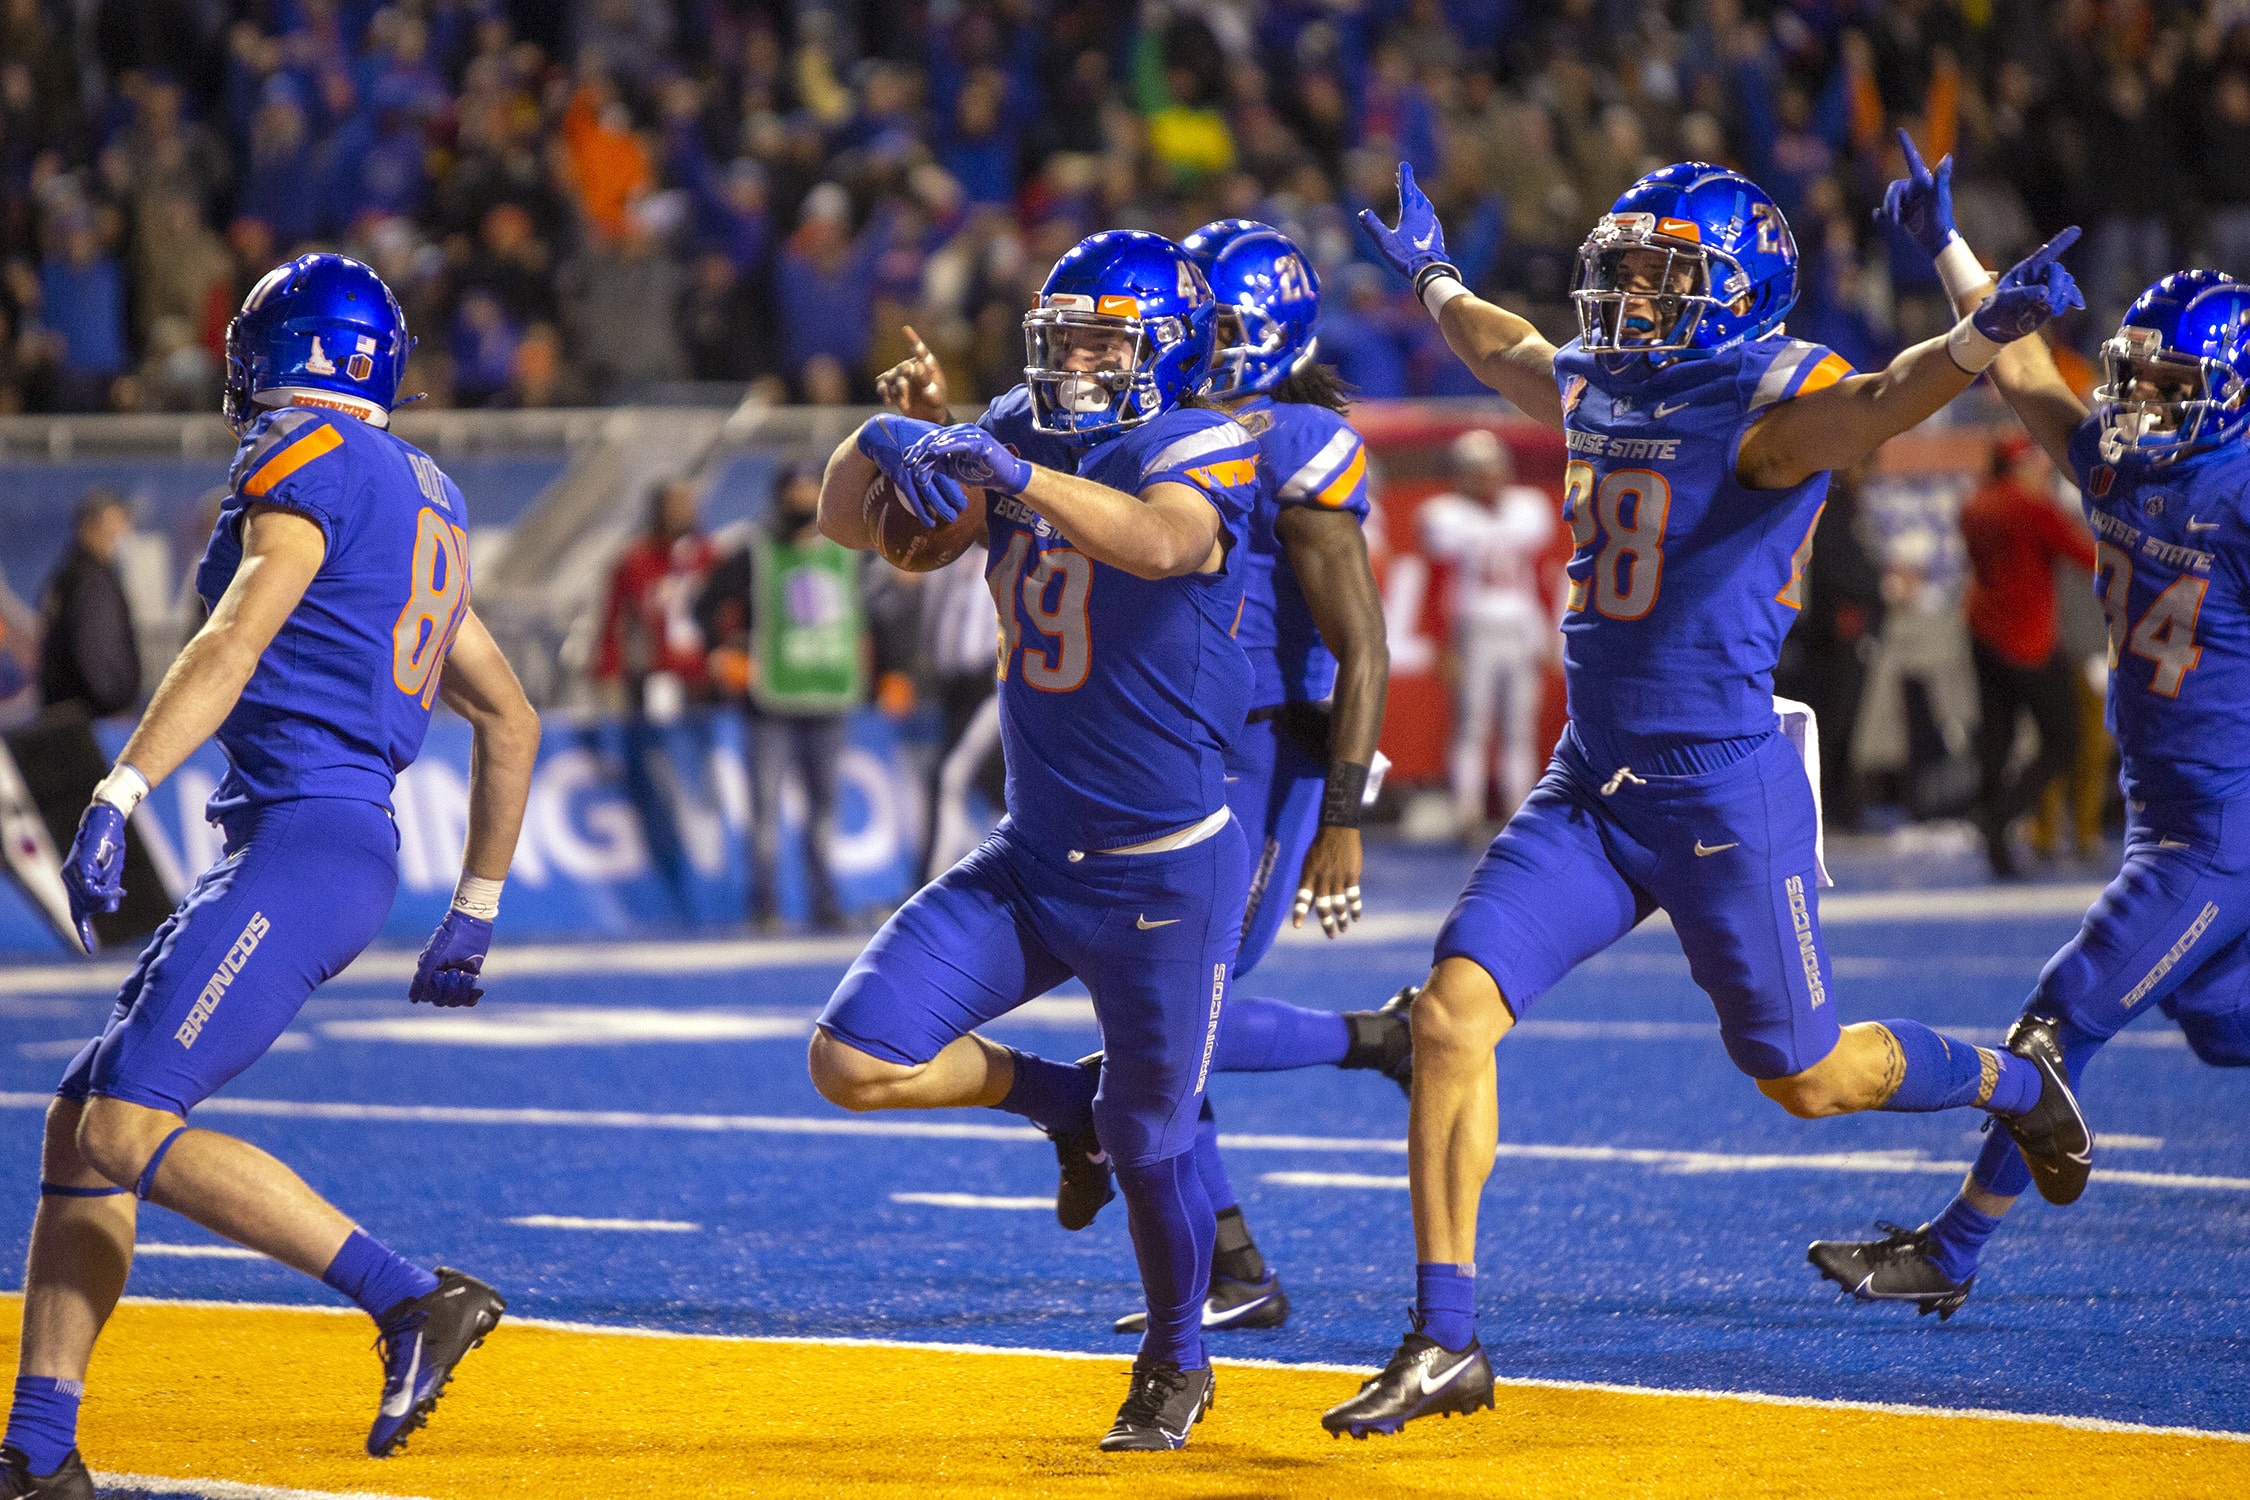 Boise State Football – Broncos 2022 season preview, predictions & best bet